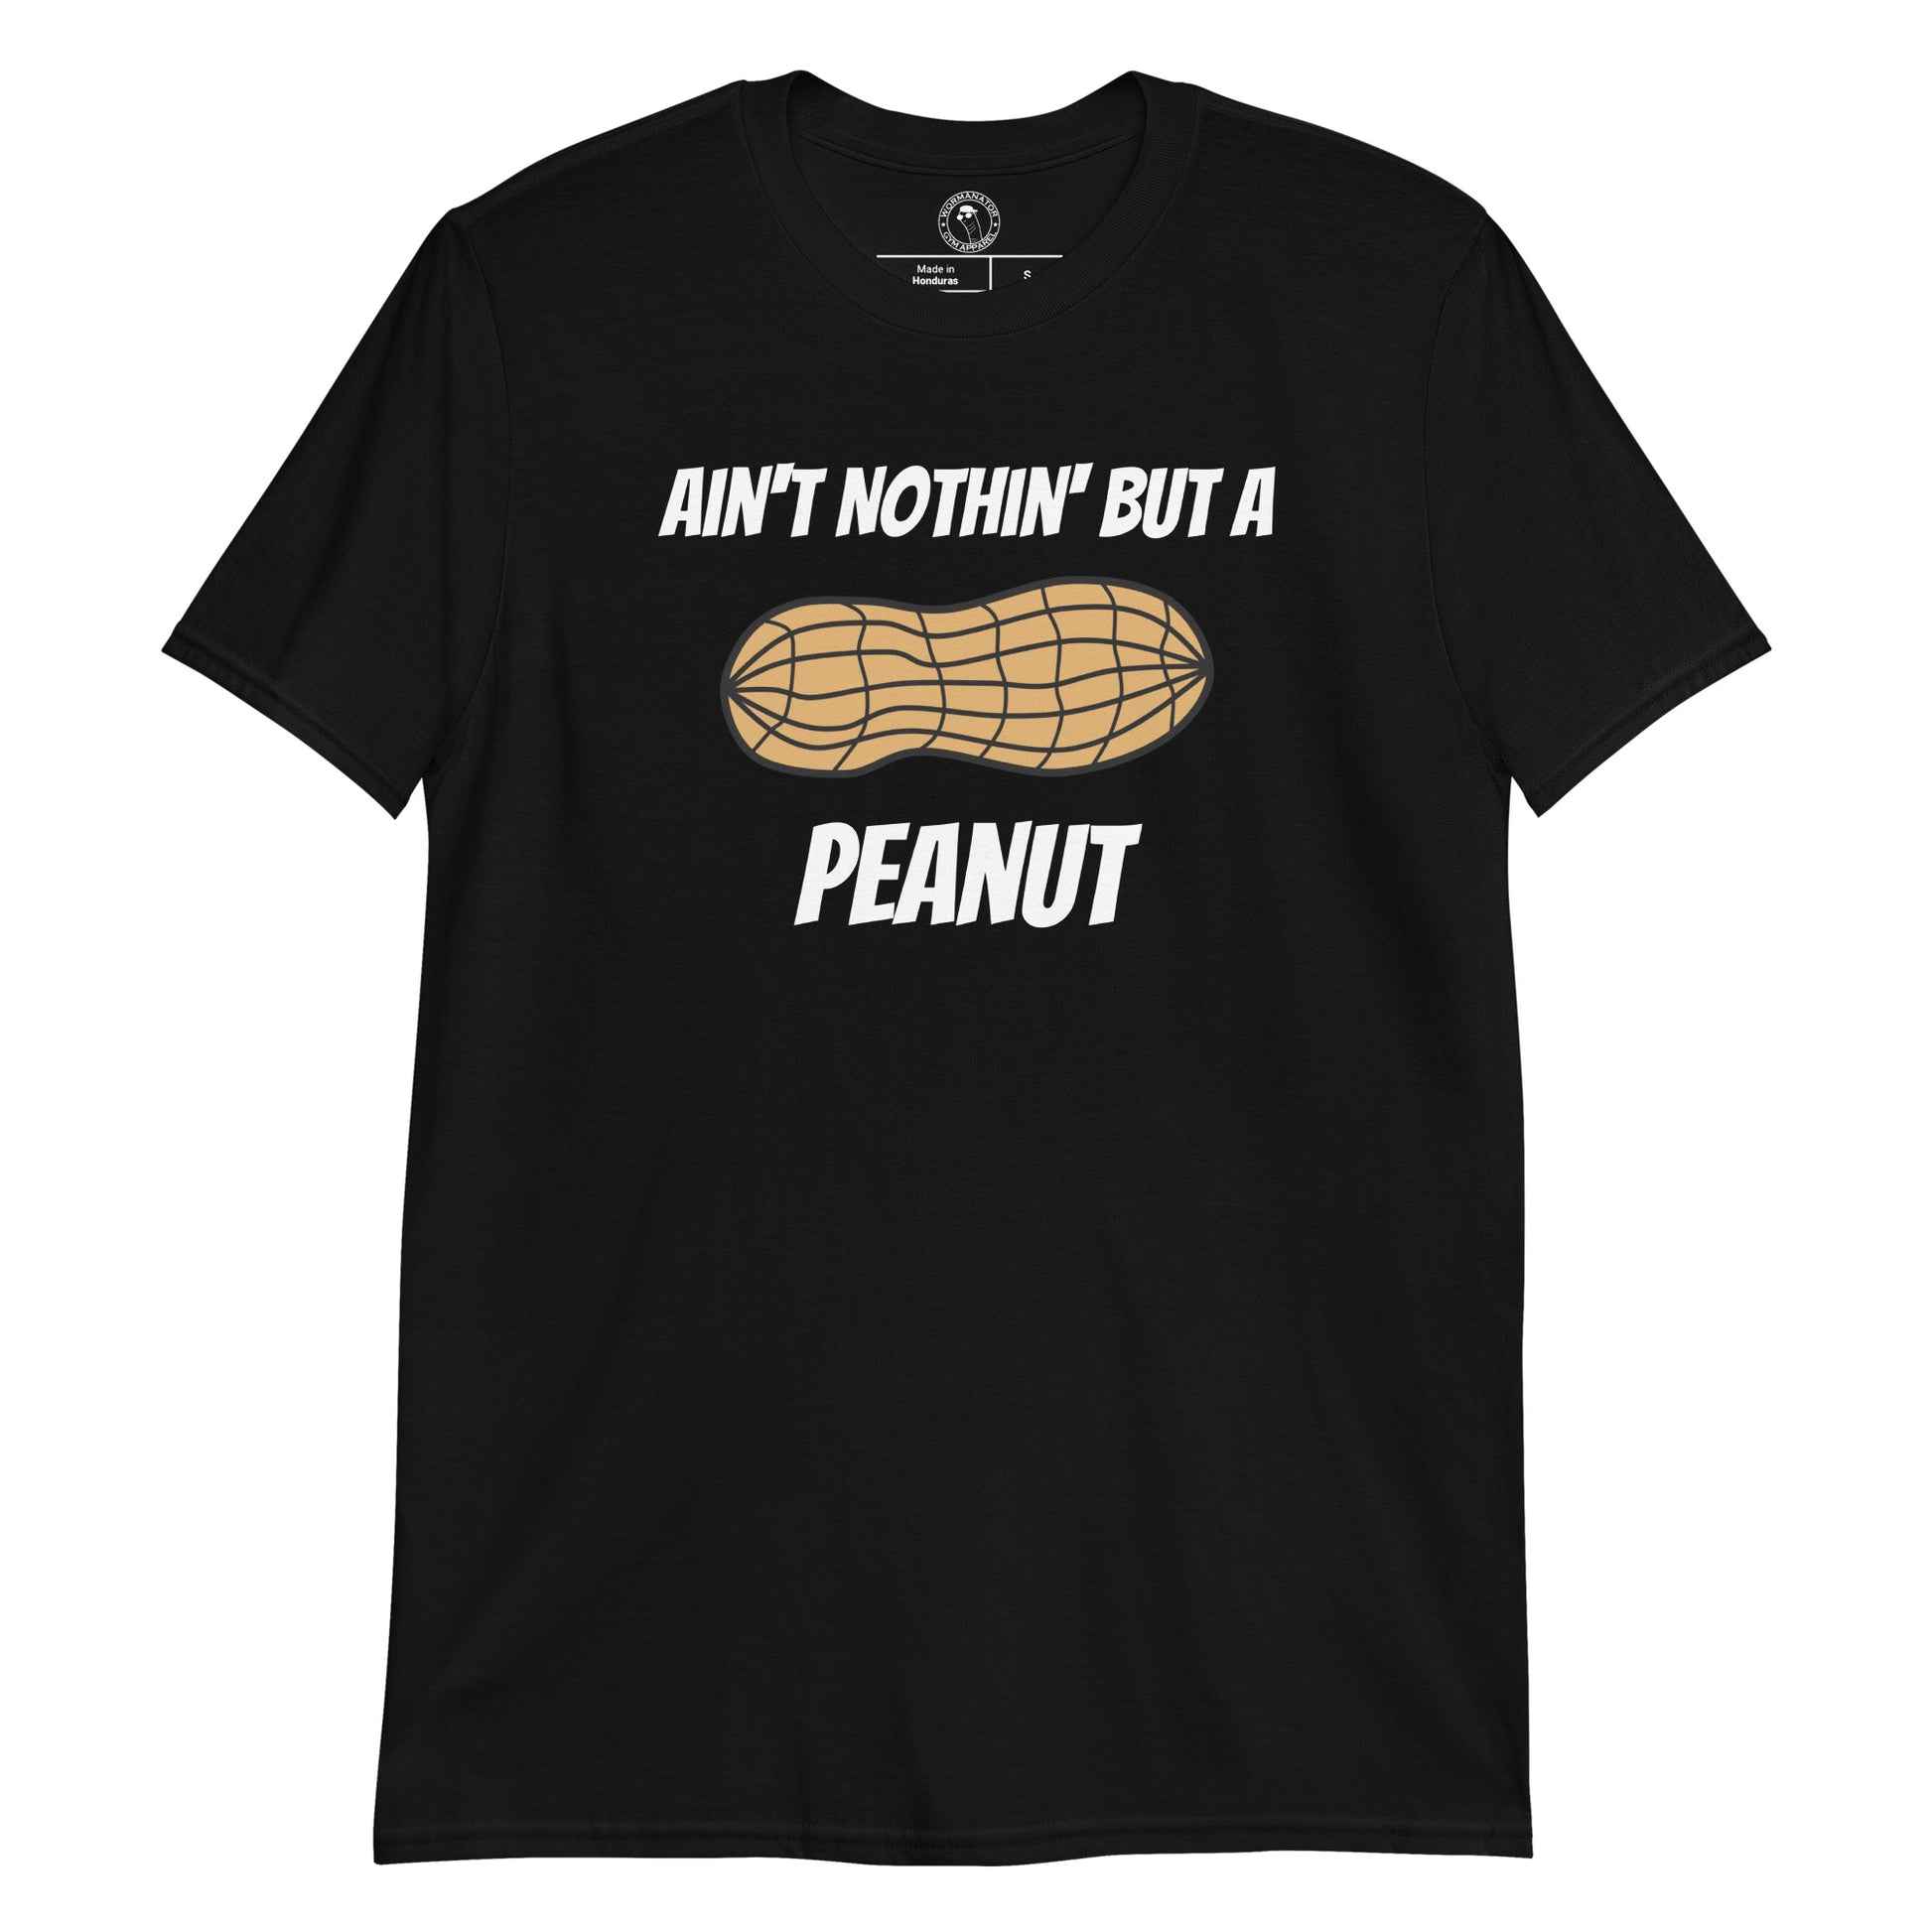 Ain't Nothin' but a Peanut Shirt in Black